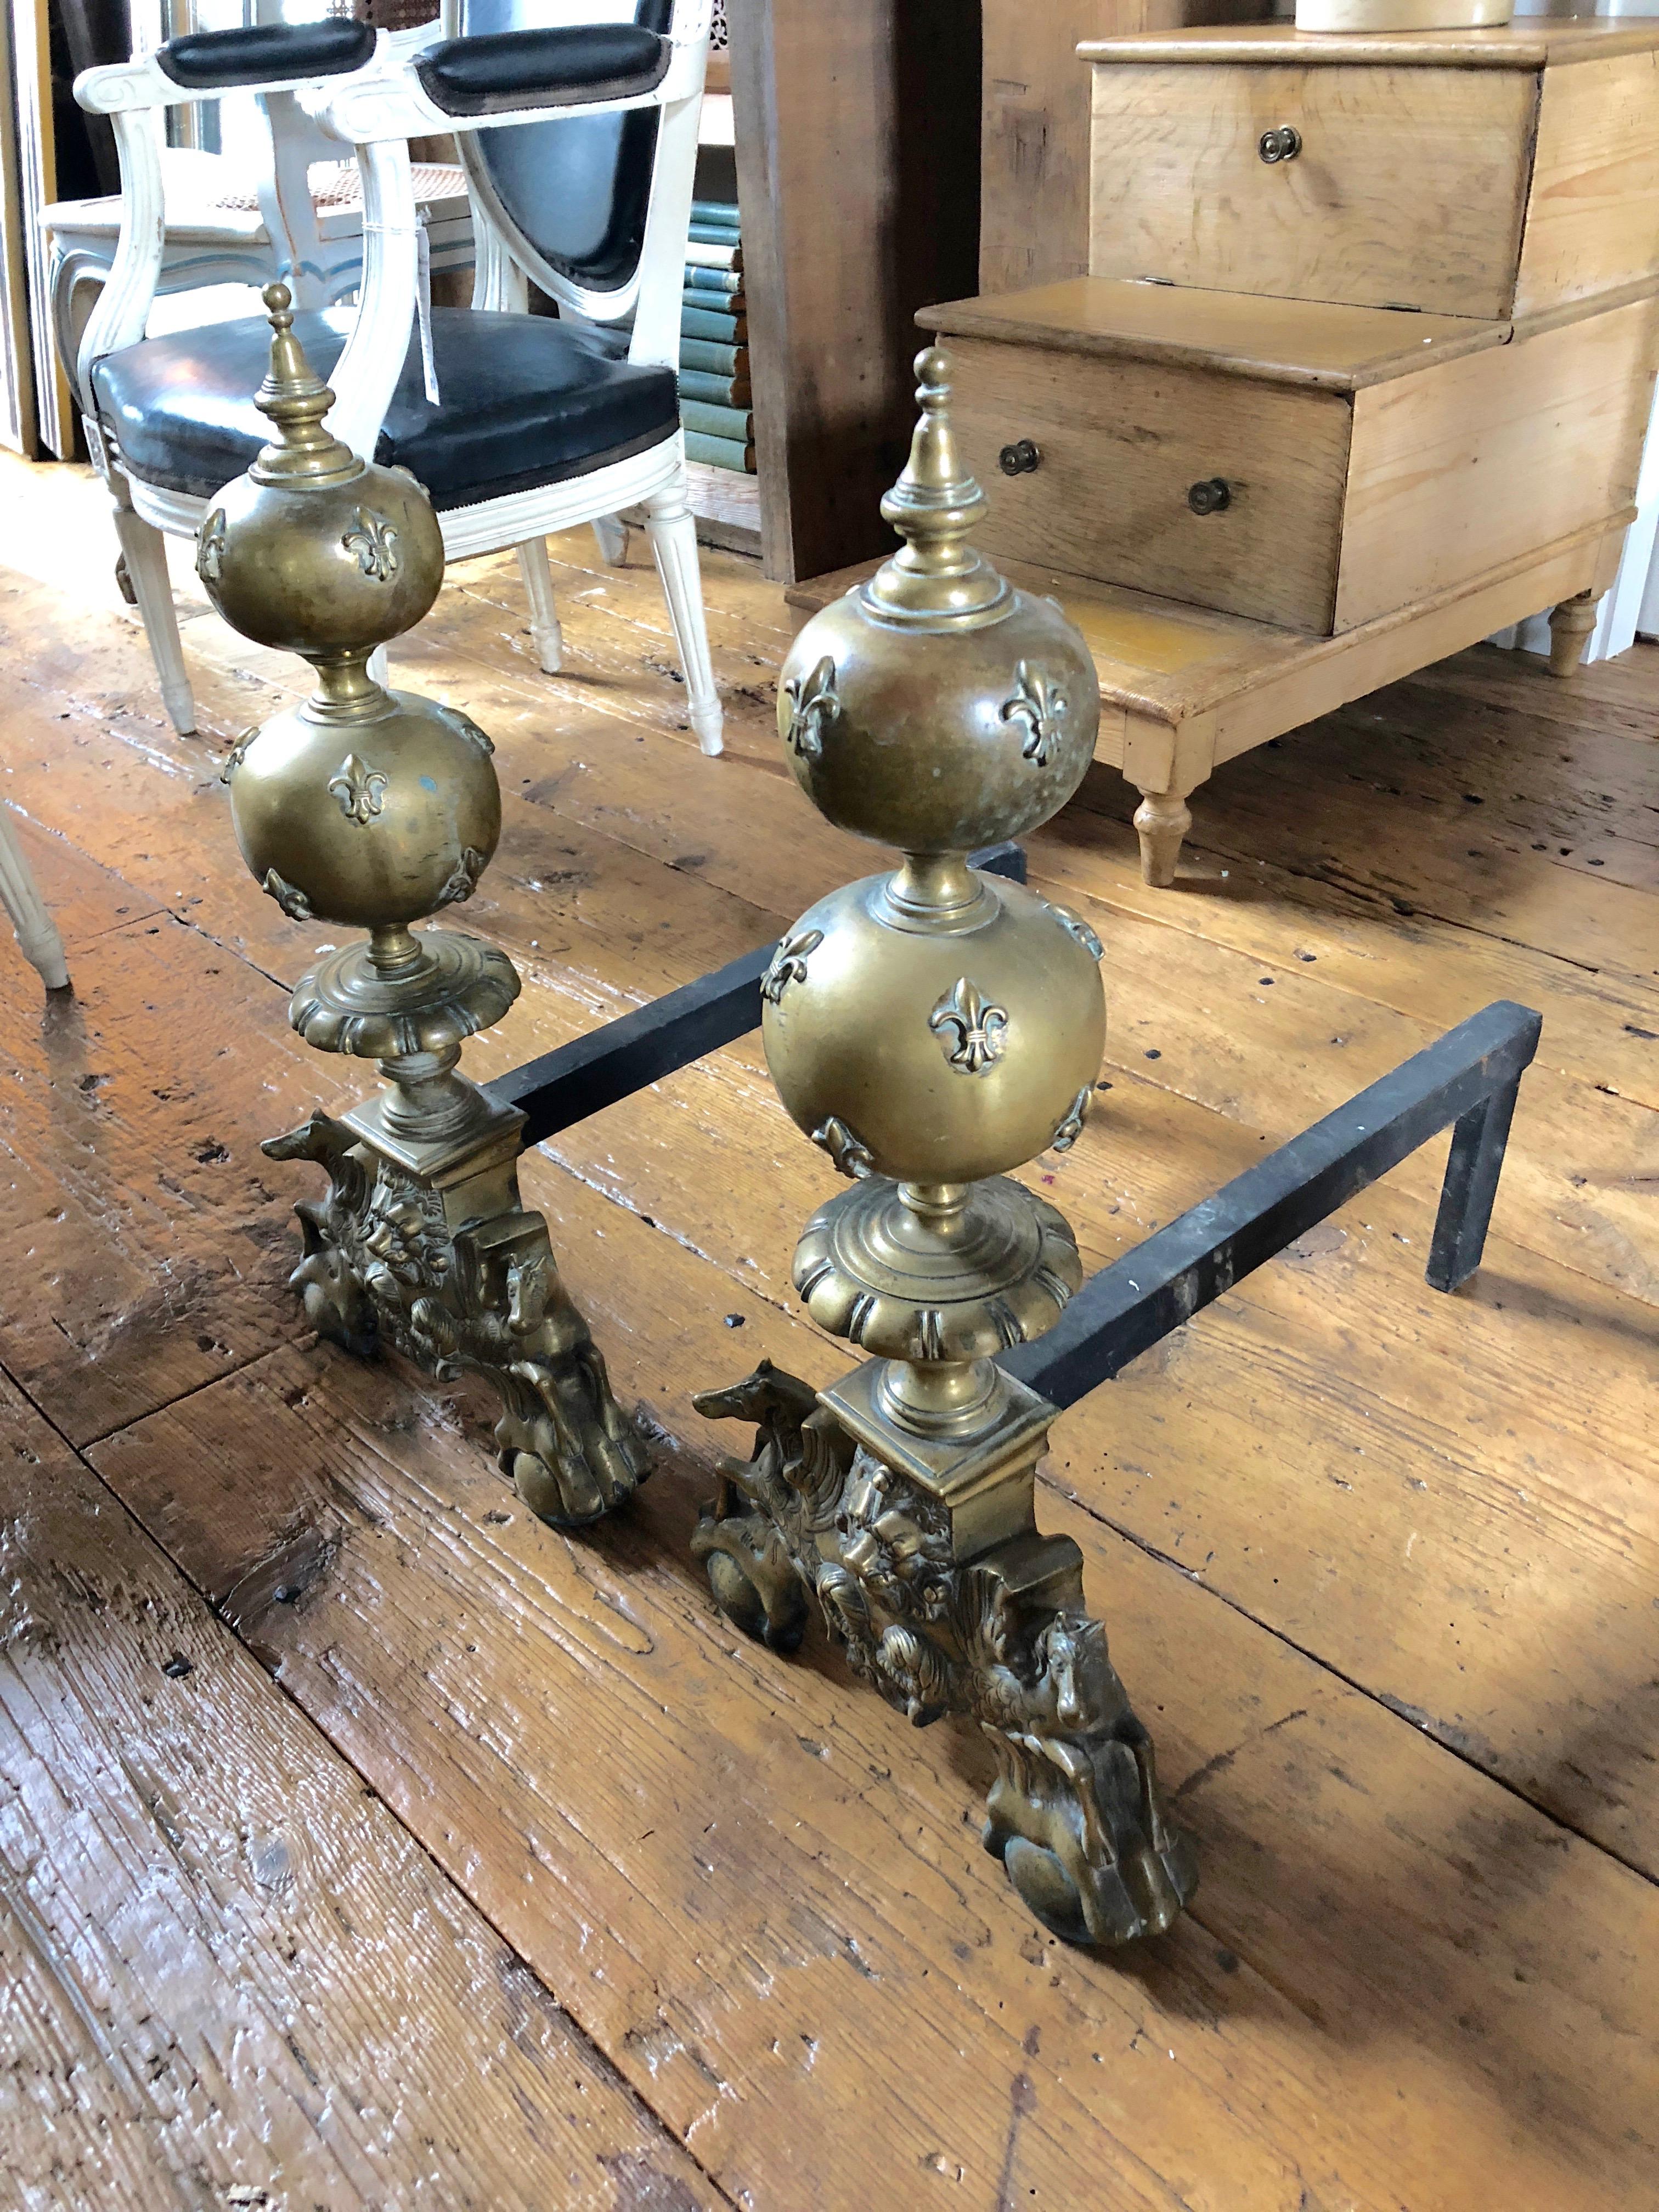 Monumental large pair of andirons, each is surmounted by detailed sculptures of a lion flanked by two horses below double fleur de lis orbs and finial.
The elegant, curved forms of the pair give an antique sophistication to the fireplace or hearth.